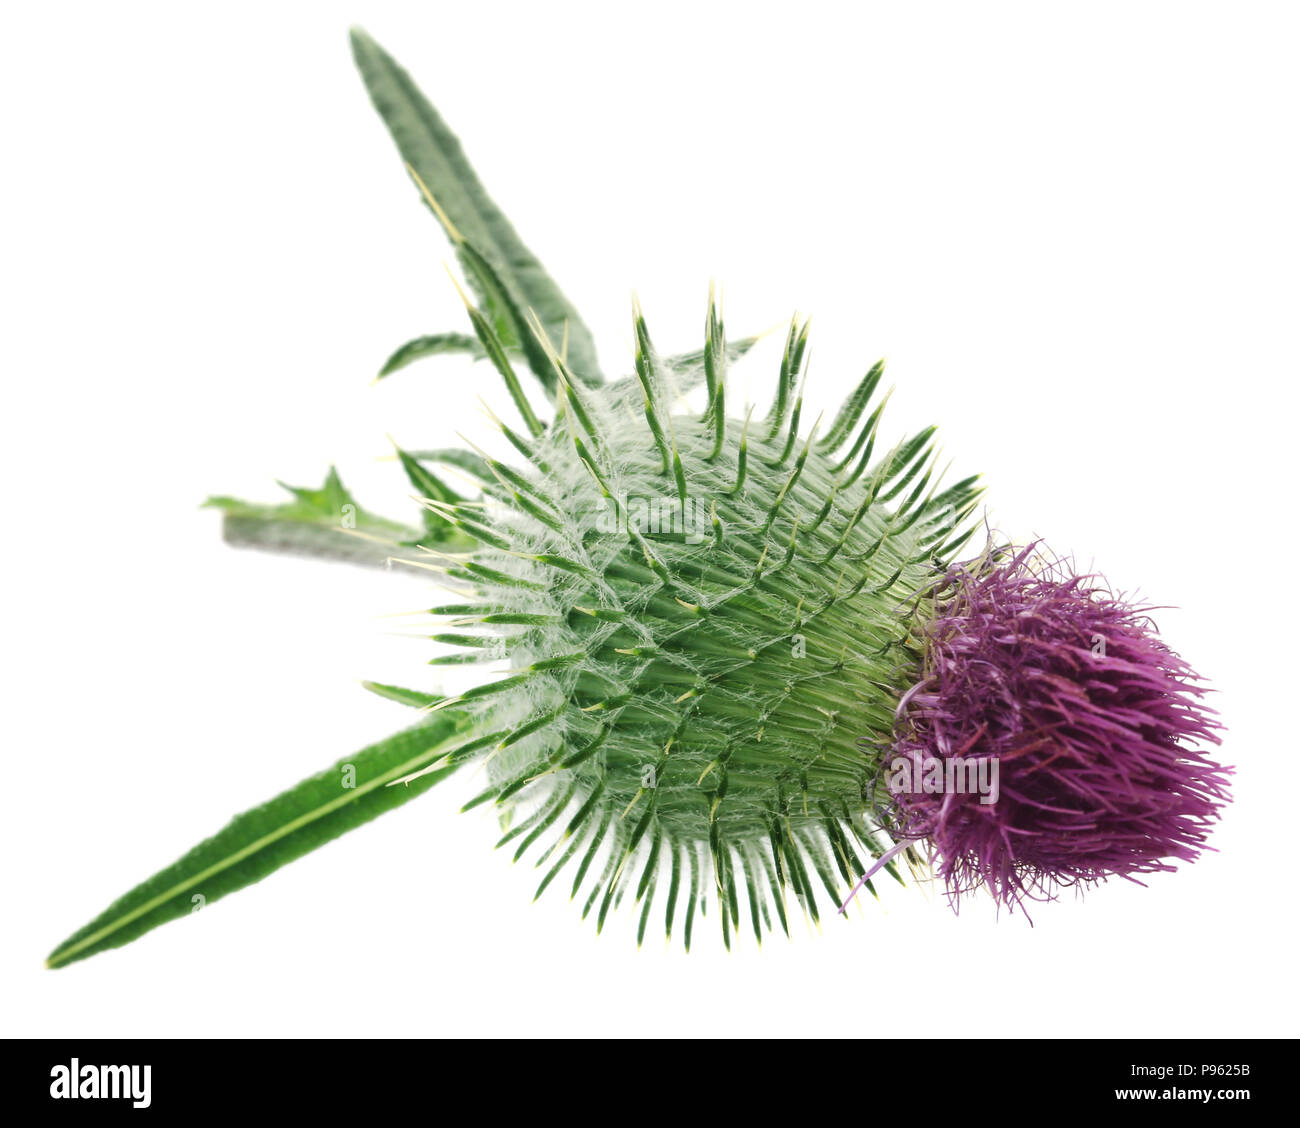 Milk thistle used as medicinal herb over white background Stock Photo